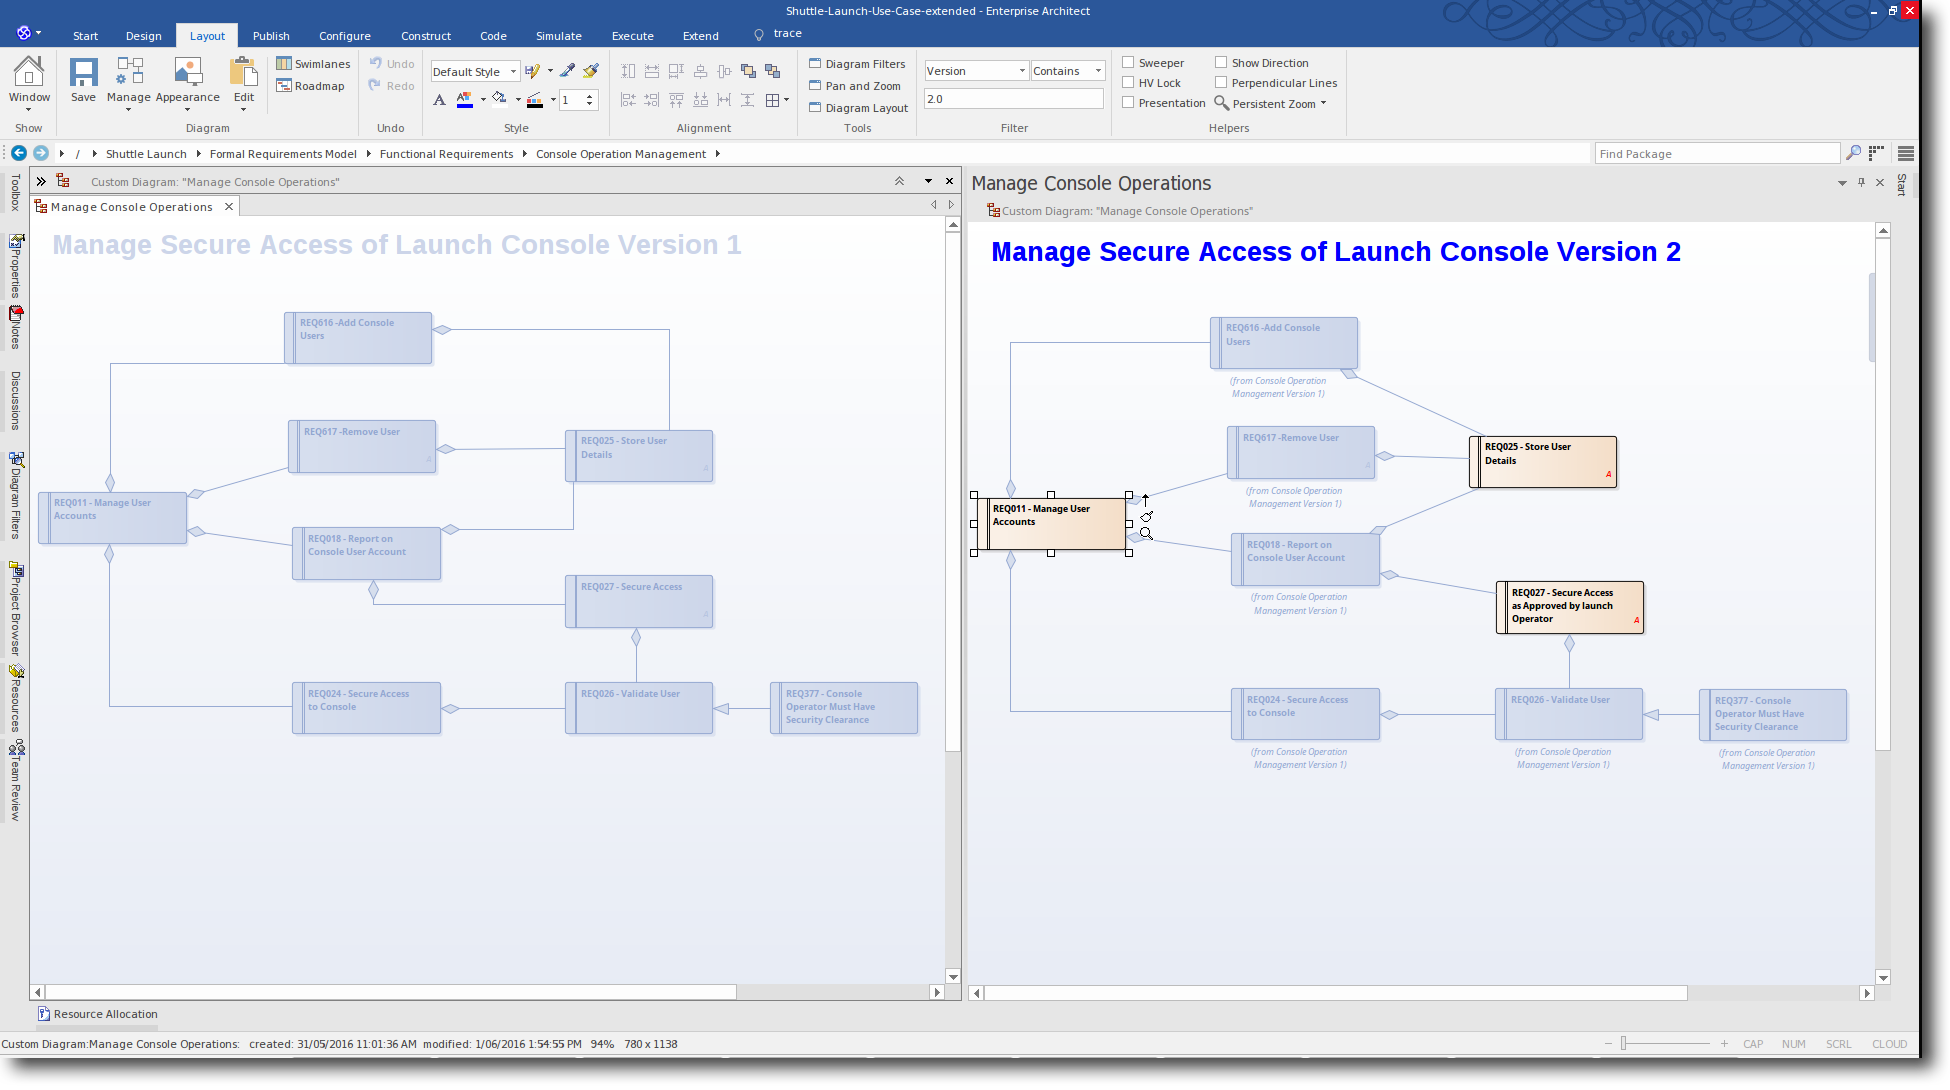 Enterprise Architect 13: Time Aware Modeling - New Version 2.0 Cloned Element is displayed on-screen